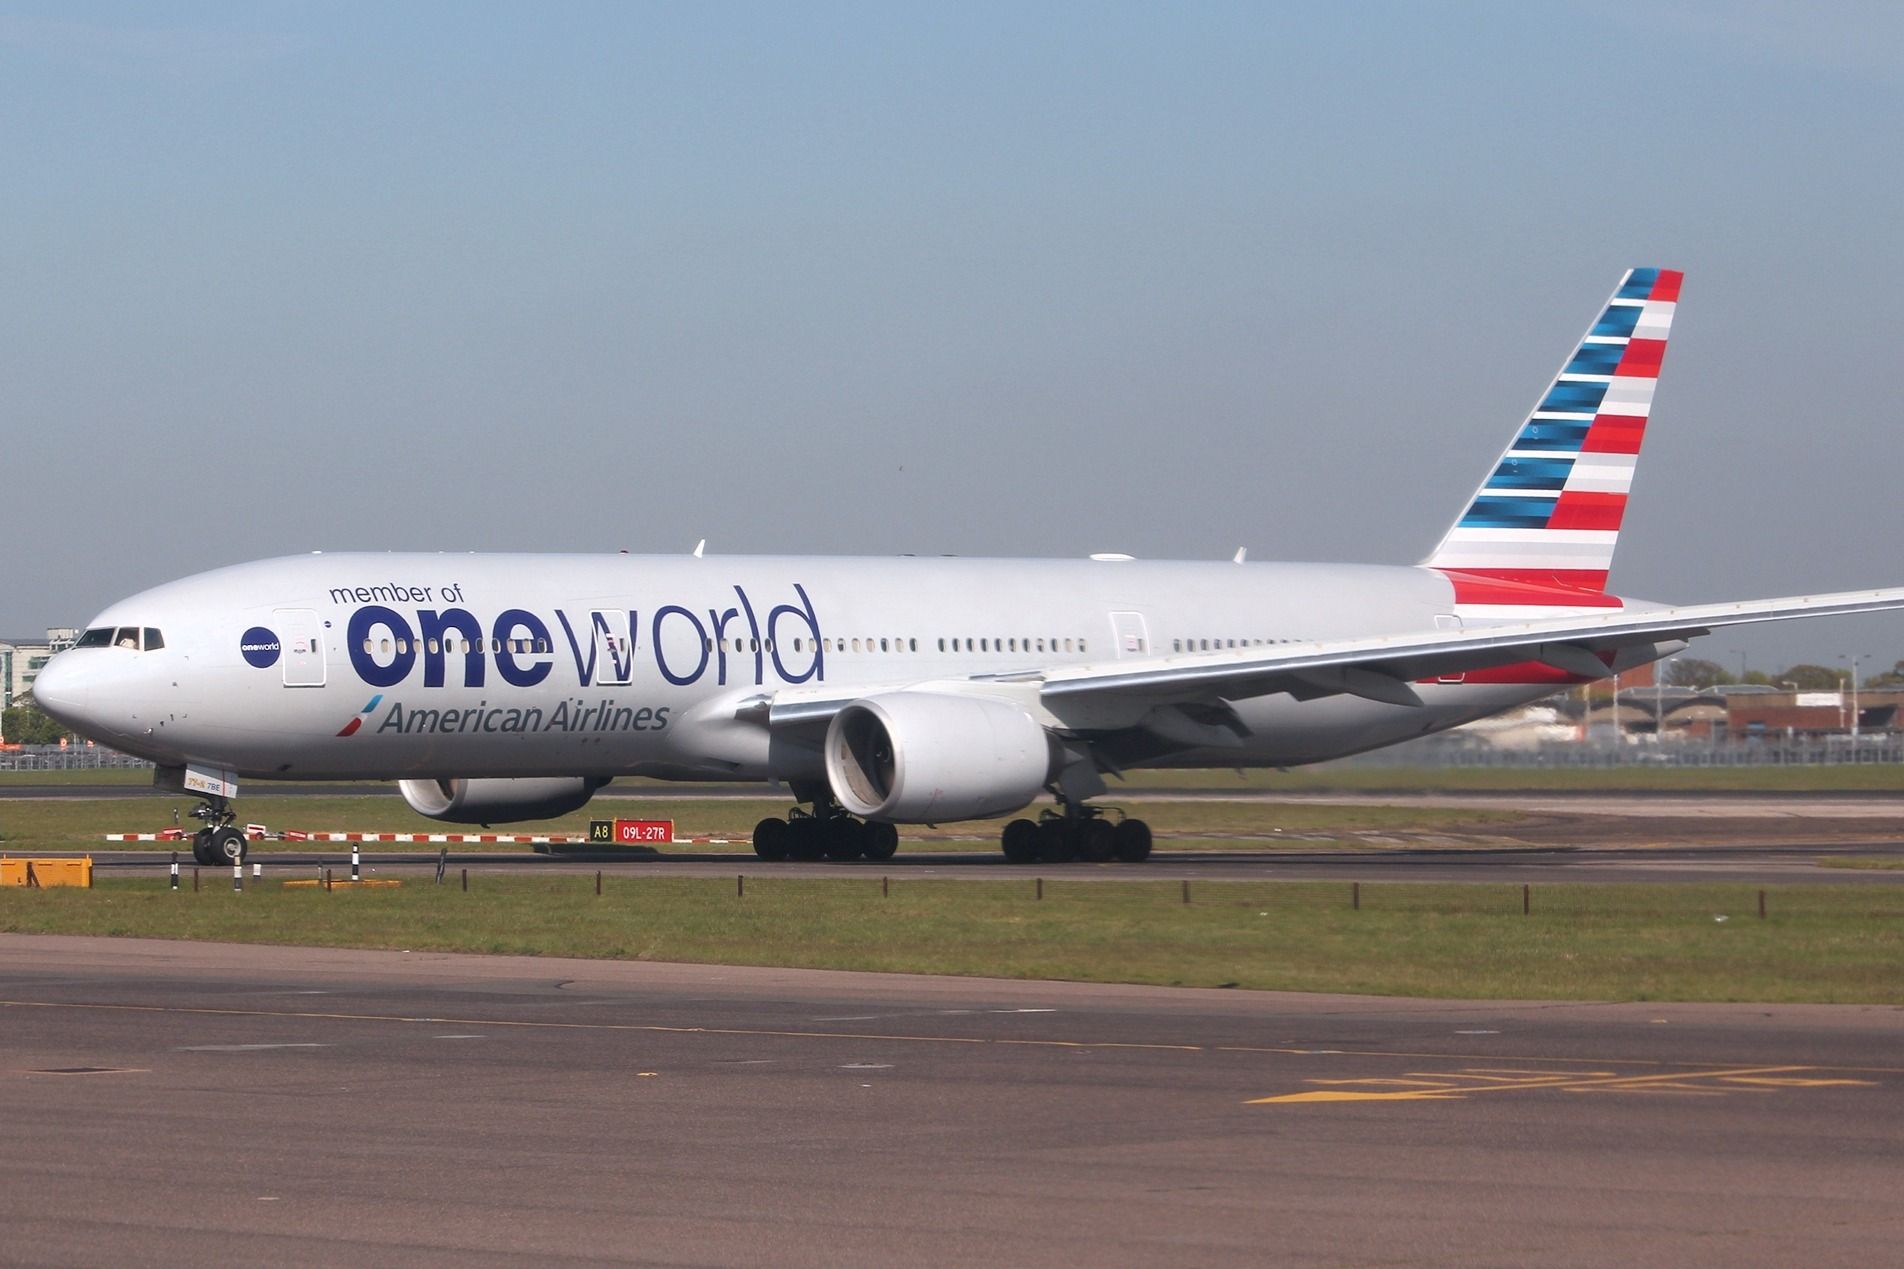 An American Airlines Boeing 777 in oneworld alliance livery